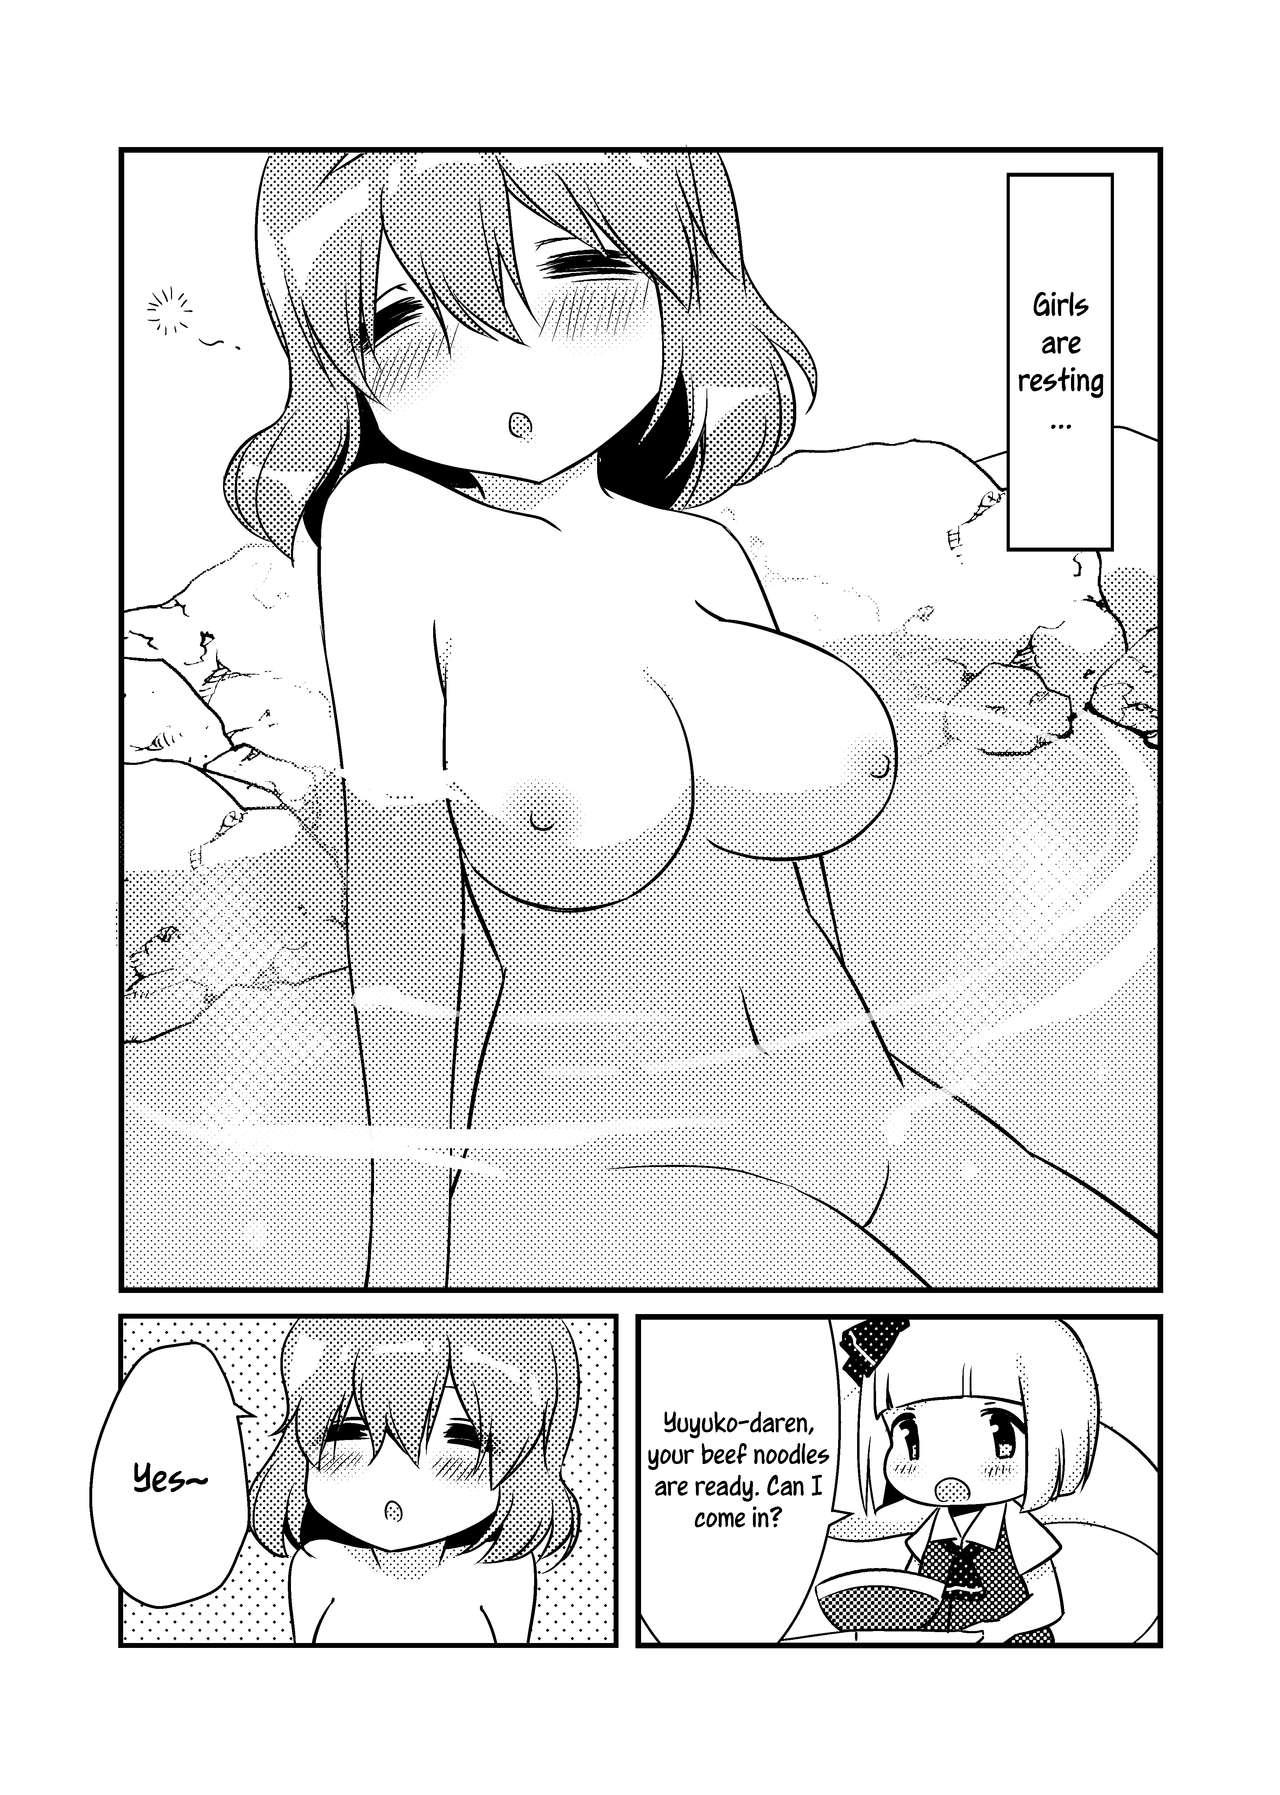 European ????一起泡温泉吧！ | ????Let's Soak in the Hot Spring! - Touhou project Outside - Page 3